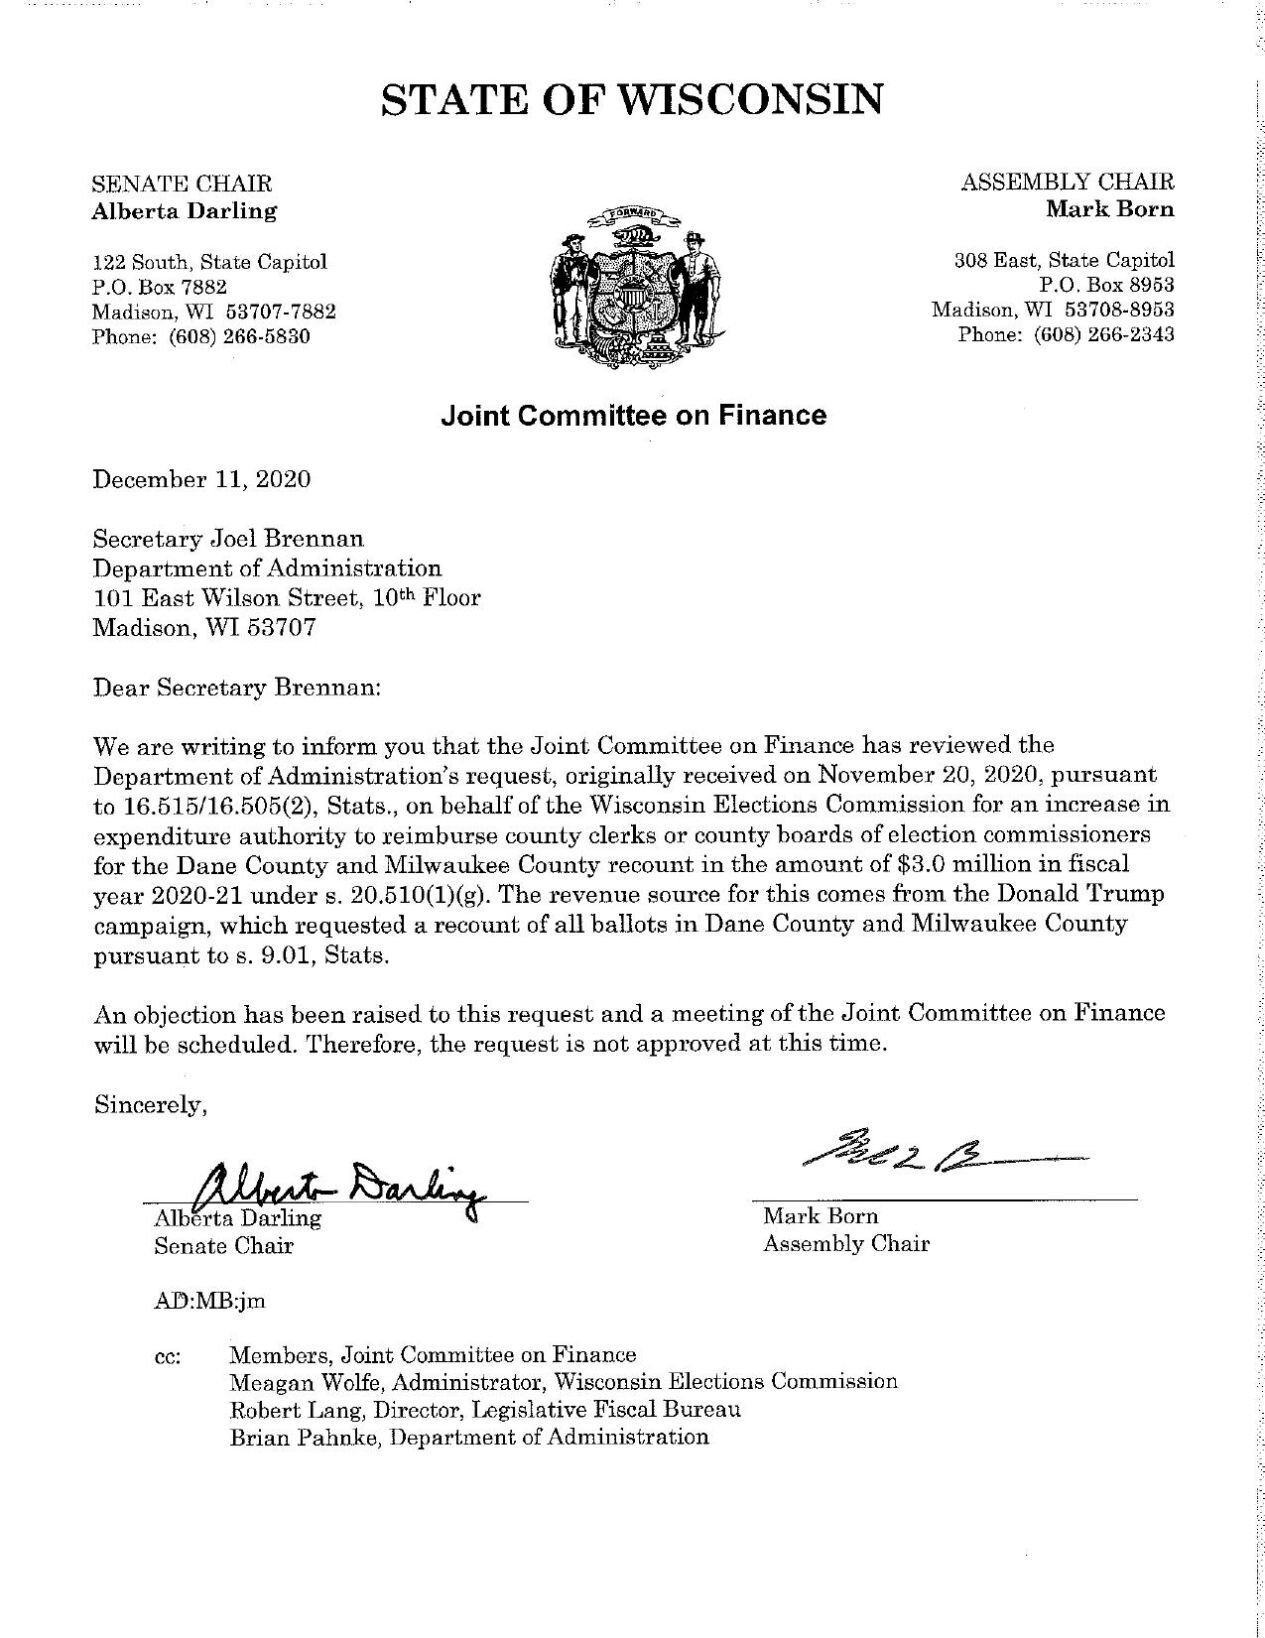 Recount objection letter